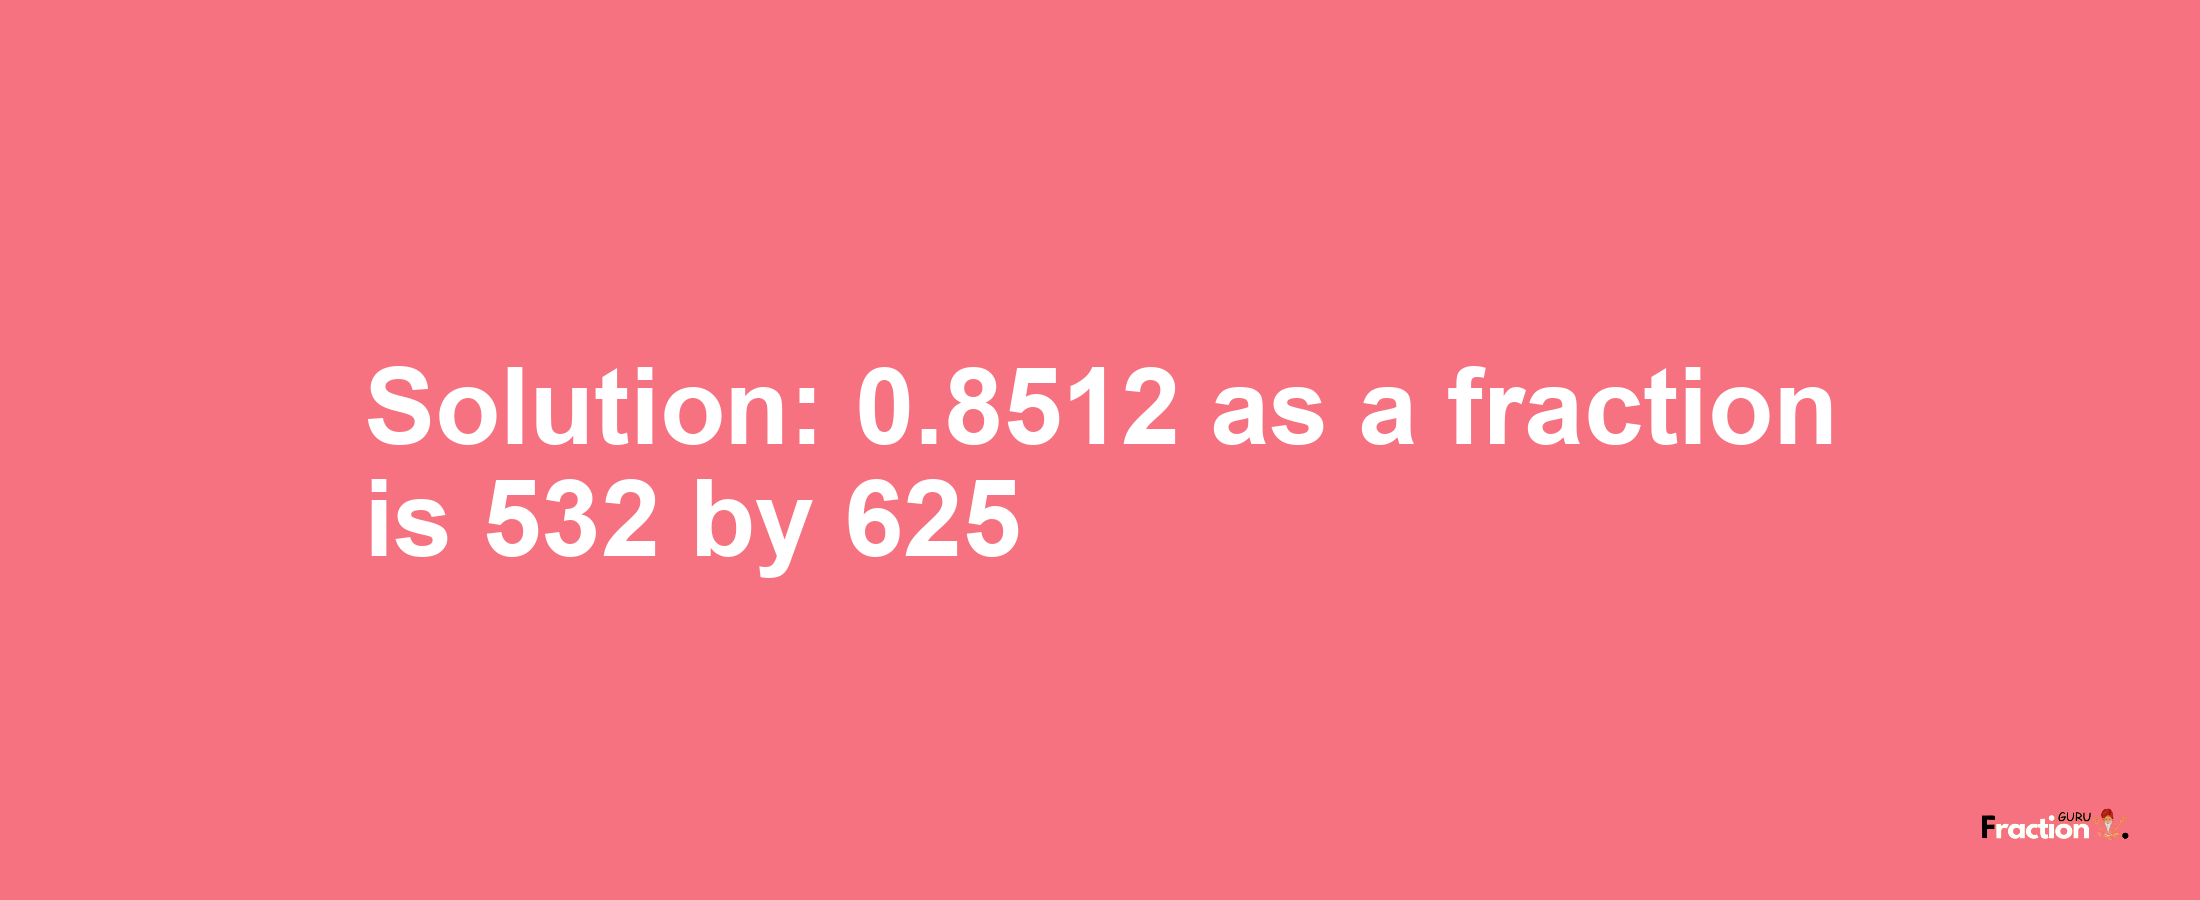 Solution:0.8512 as a fraction is 532/625